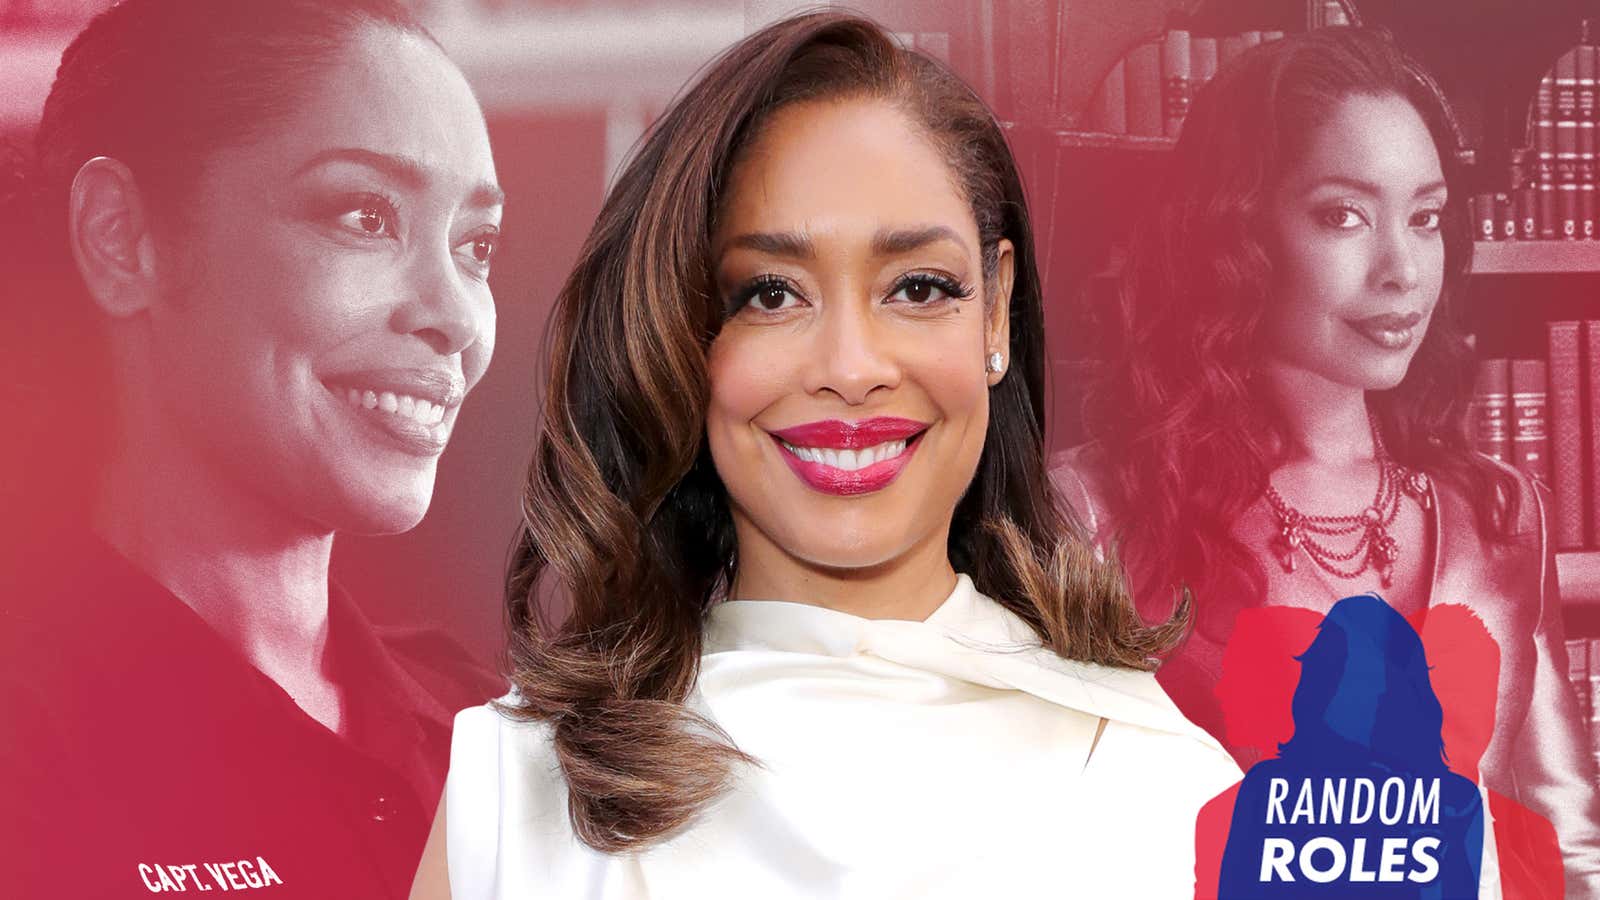 From left: Gina Torres in 9-1-1 (Photo: Jordin Althaus/Fox), at the 13th Annual ESSENCE Black Women in Hollywood Luncheon (Photo: Leon Bennett/Getty Images for ESSENCE), and in Suits (Photo: Nigel Parry/USA Network)